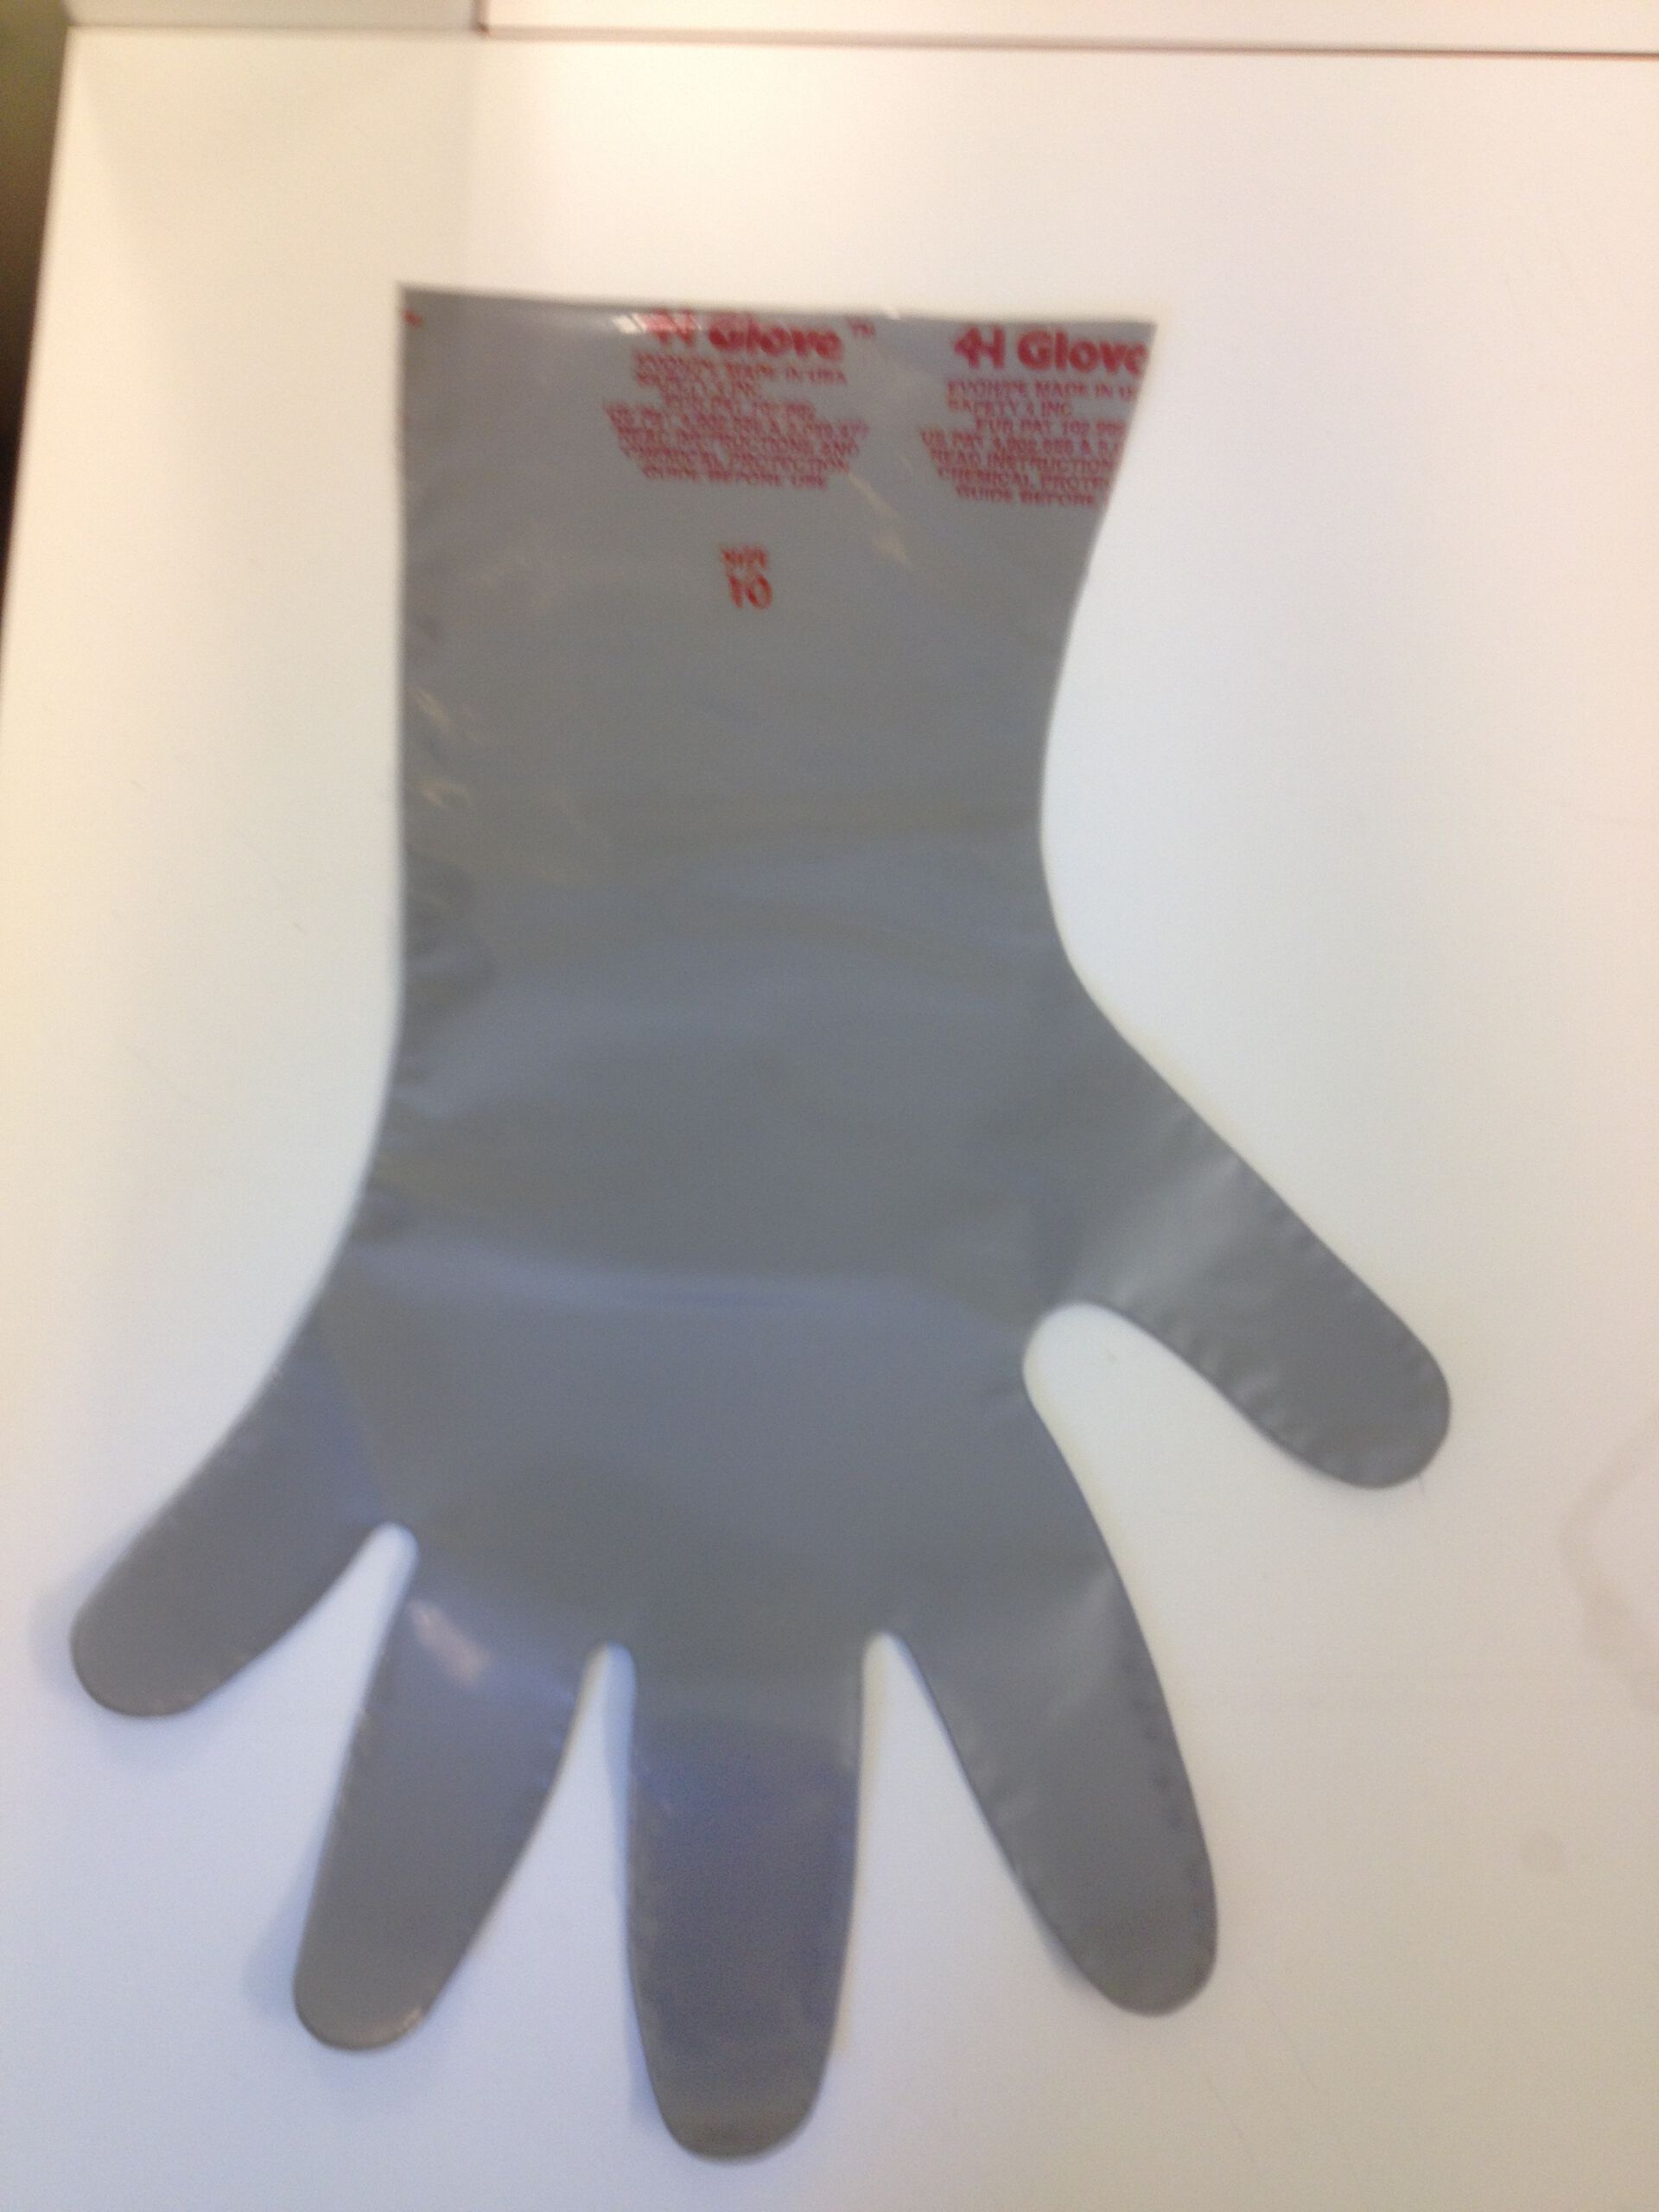 For your hands: 4H-glove for protecion cleaning chemical spill. Use an ordinay nitrill glove outside  to improve the grip.